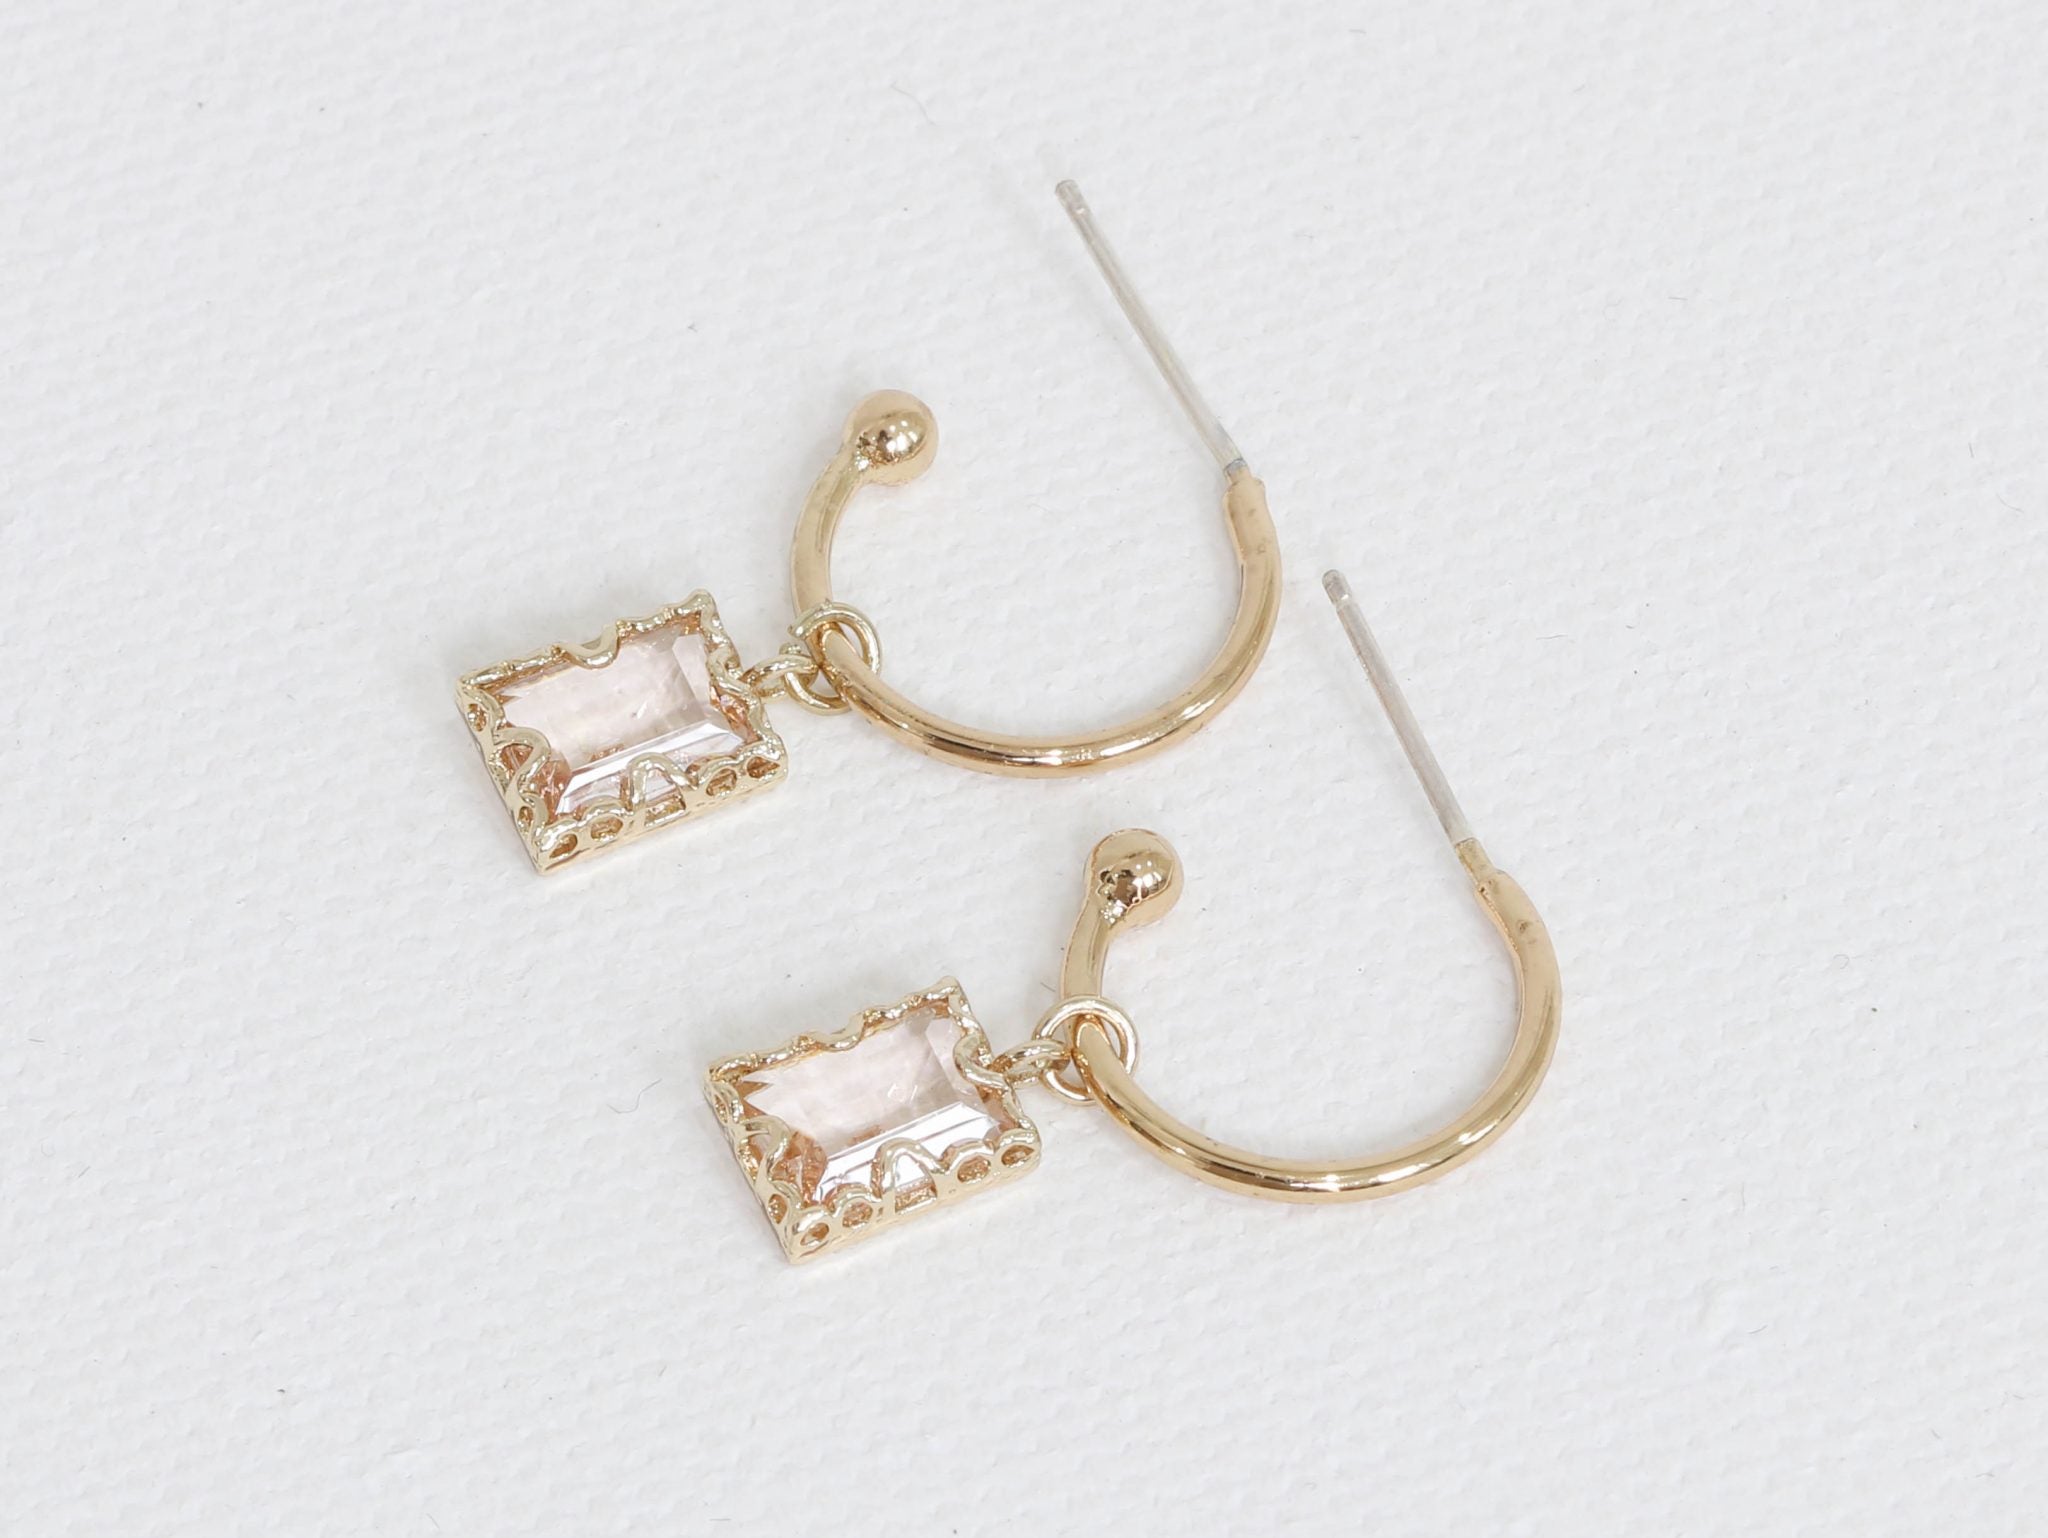 Small gold hoop earrings with pink crystals